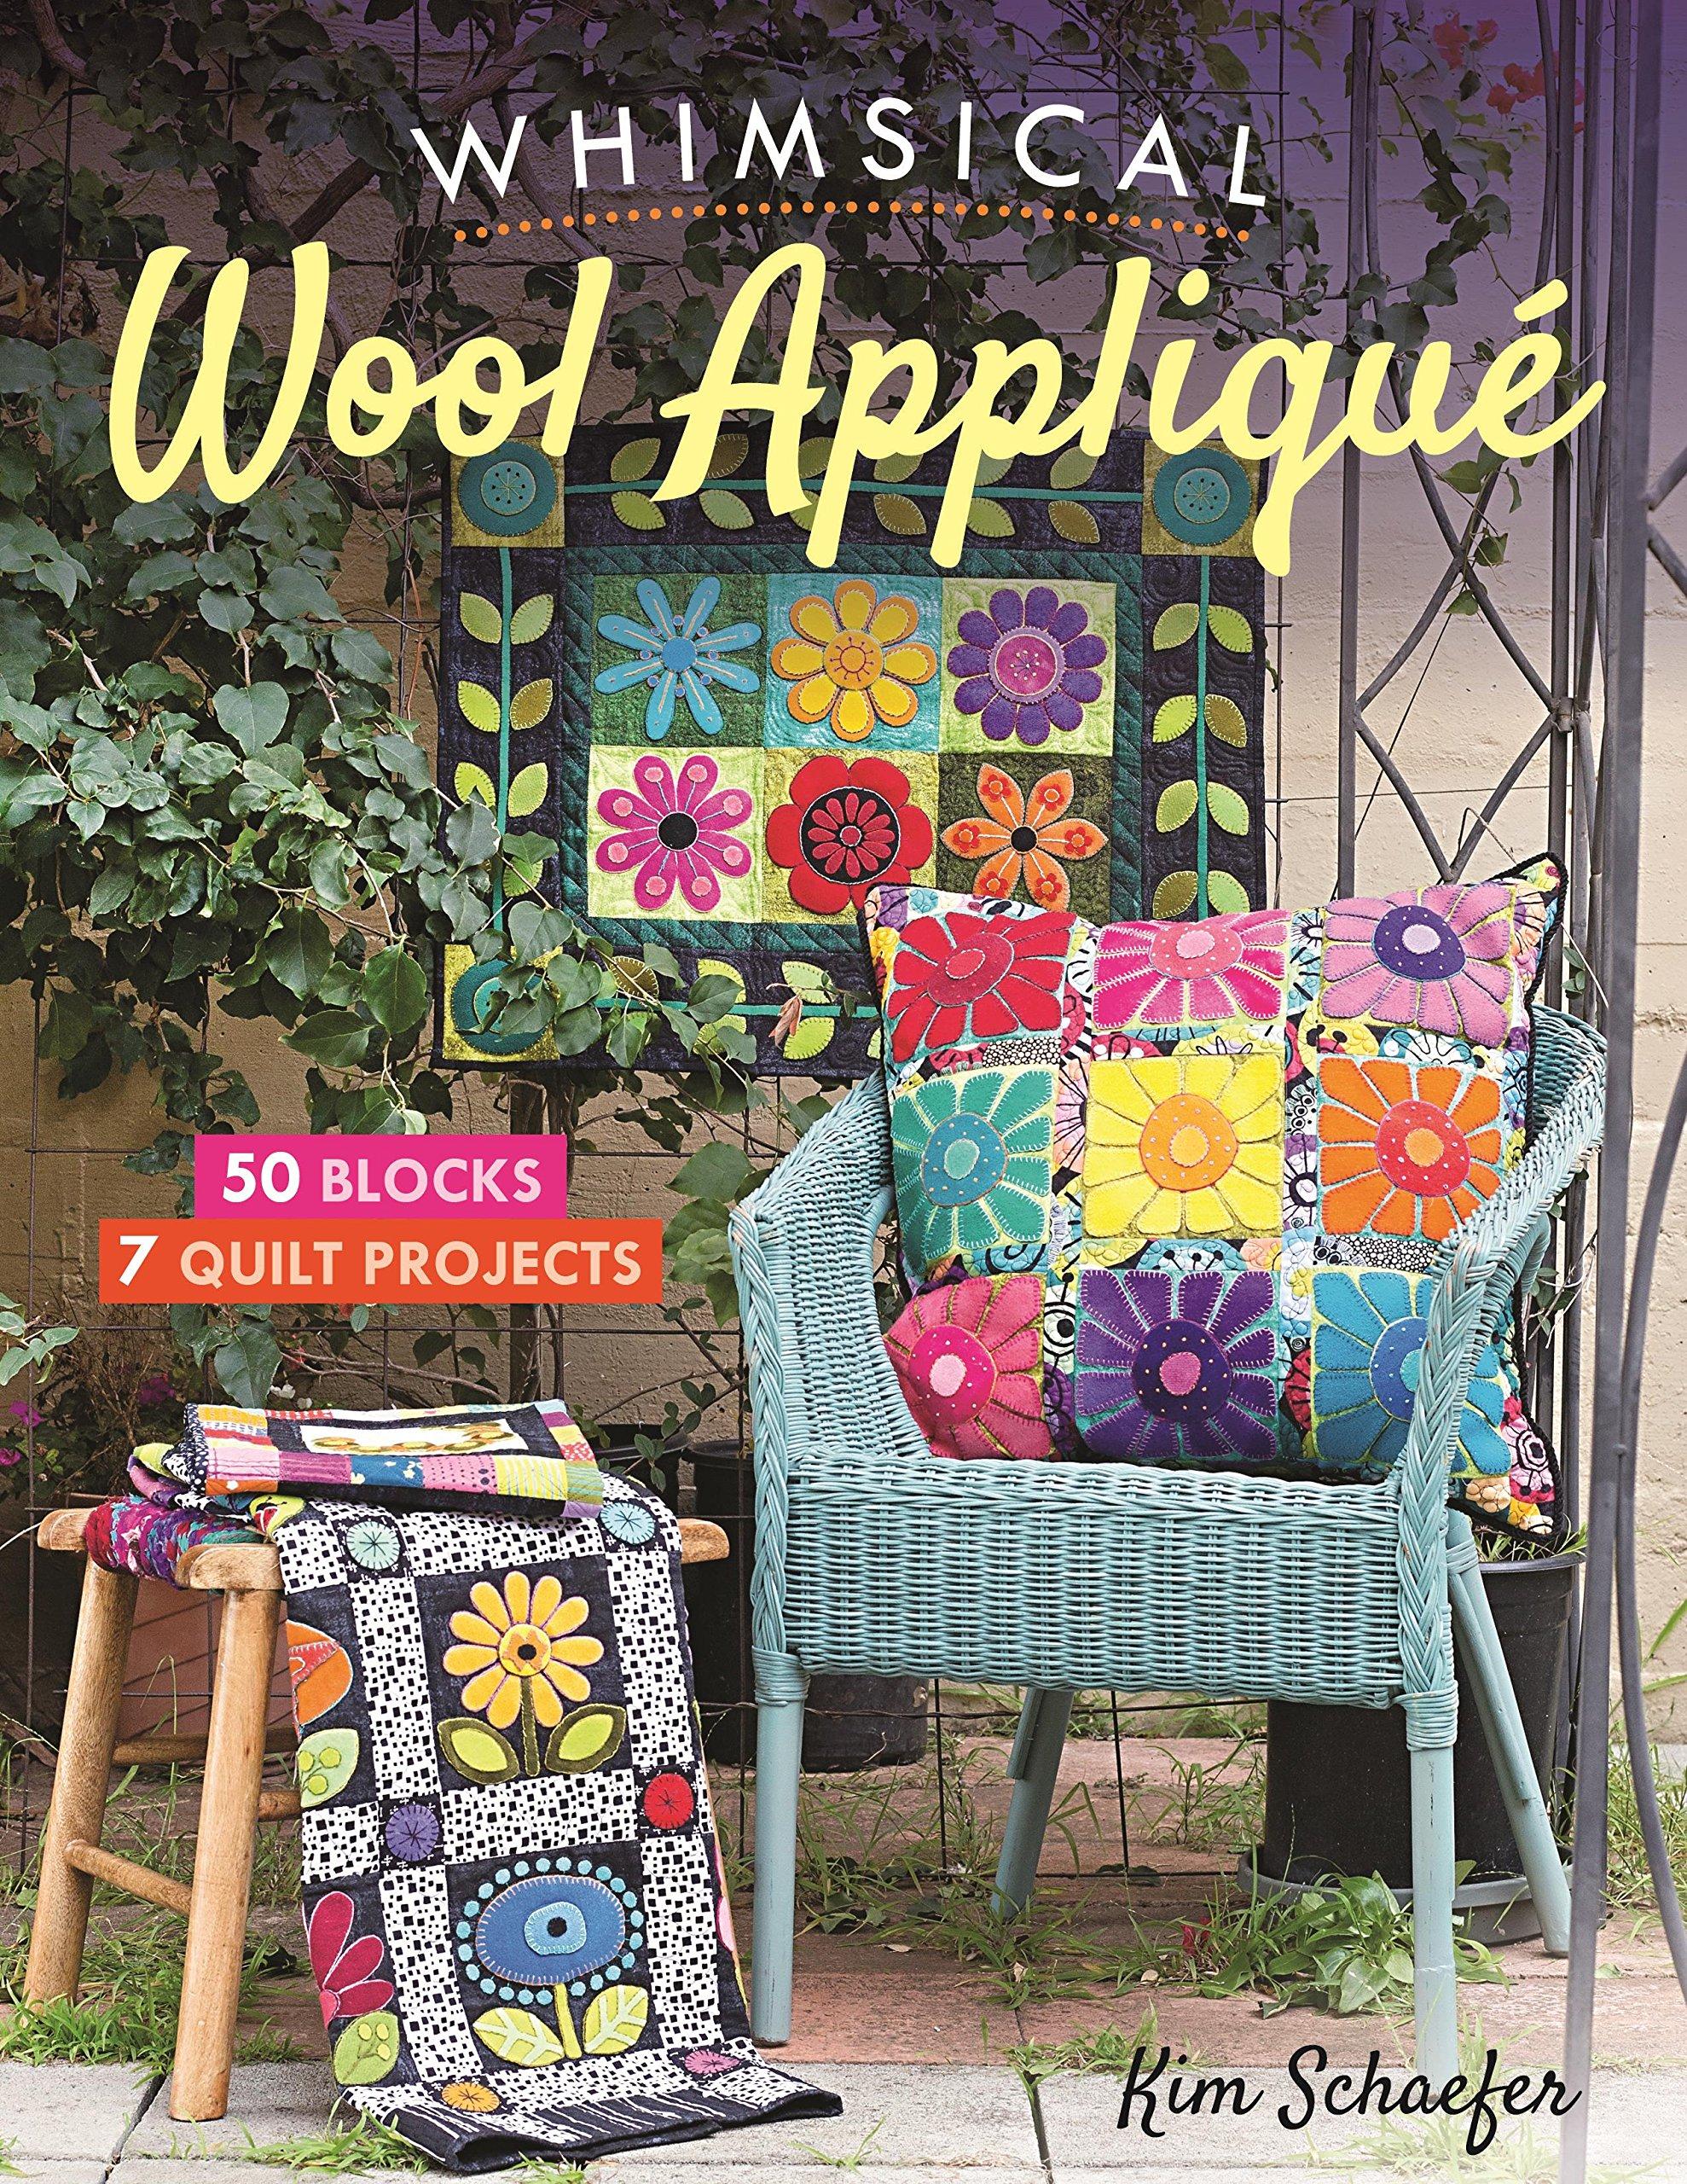 Whimsical Wool Applique: 50 Blocks, 7 Quilt Projects